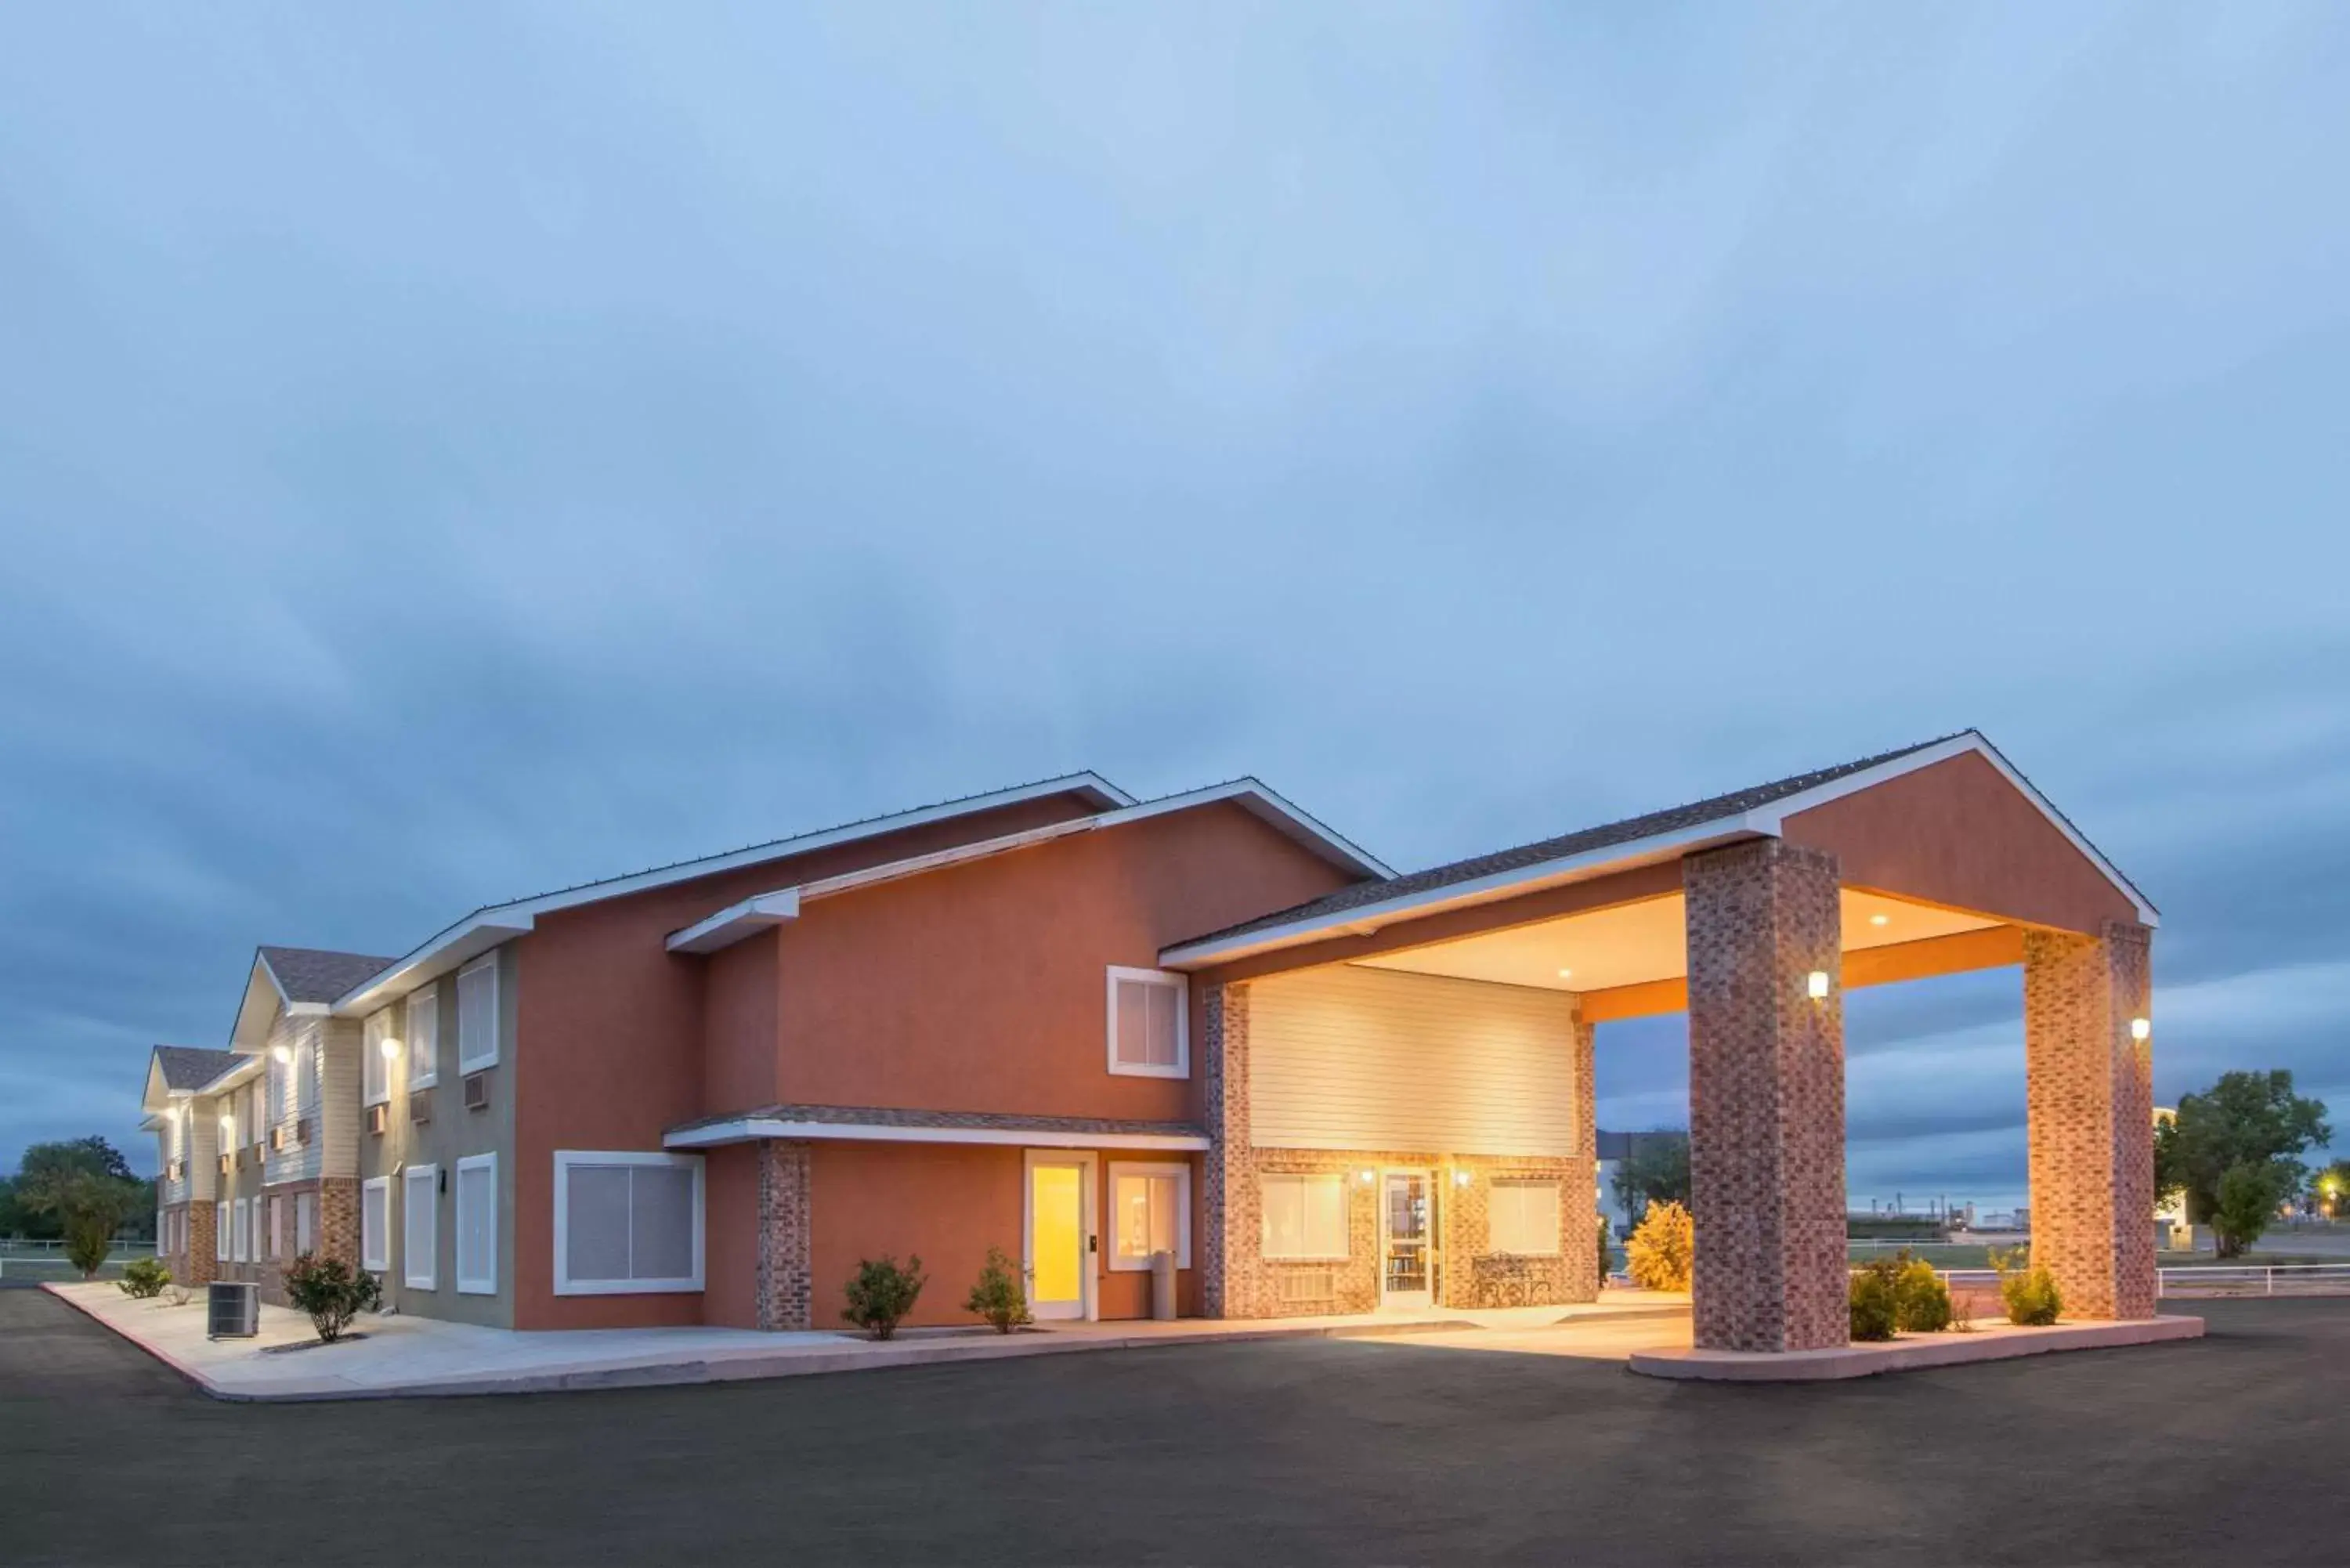 Property Building in Super 8 by Wyndham Portales